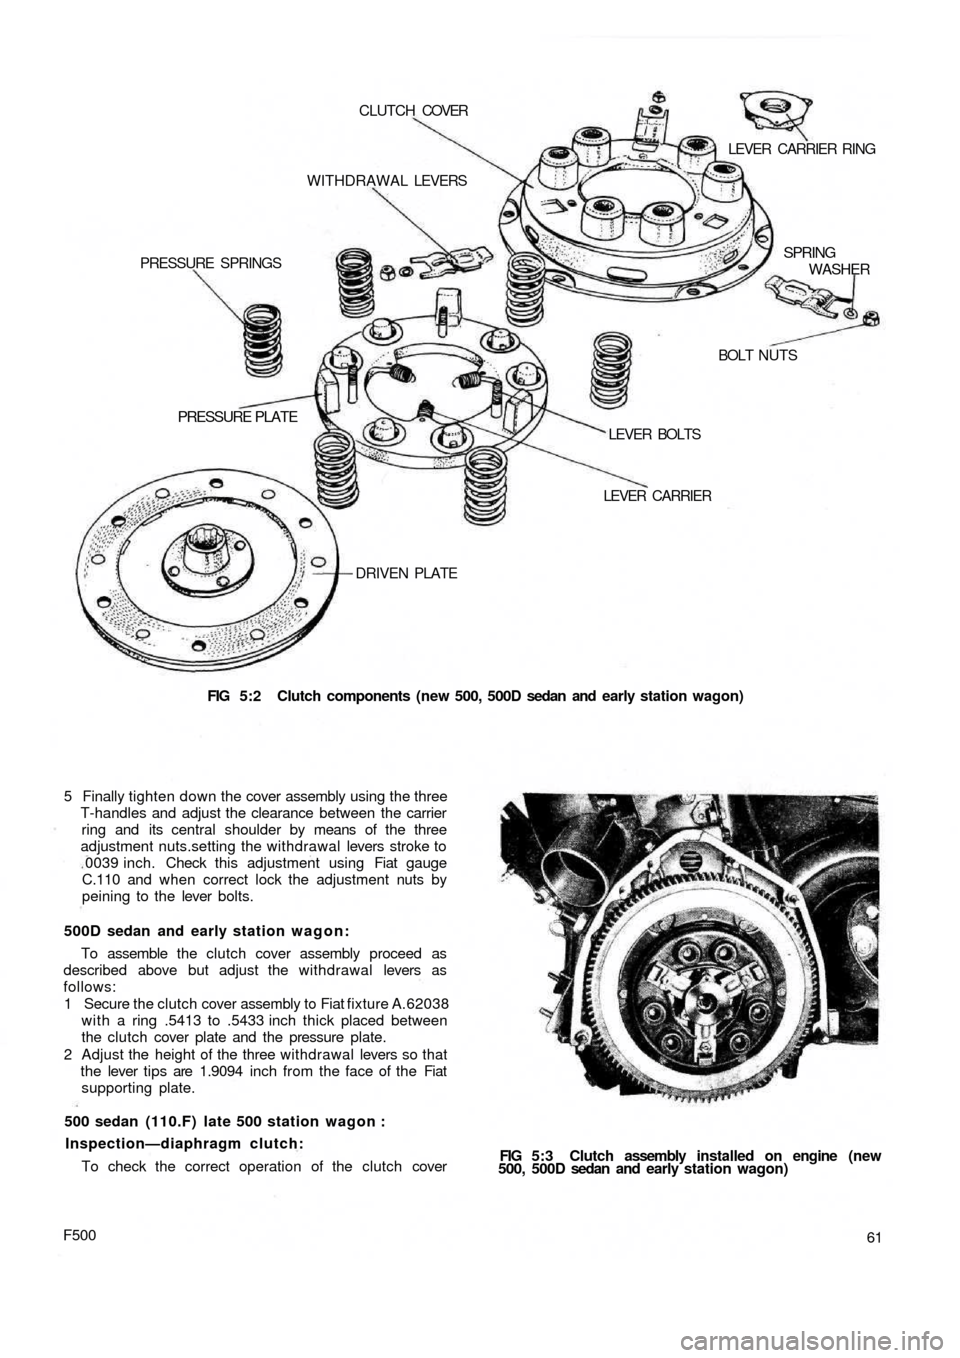 FIAT 500 1970 1.G Repair Manual FIG 5:2  Clutch components (new 500, 500D sedan  and  early station wagon) DRIVEN PLATE
PRESSURE  PLATE
LEVER  CARRIER LEVER  BOLTSBOLT NUTS PRESSURE  SPRINGSWITHDRAWAL LEVERS CLUTCH COVER
LEVER  CARR